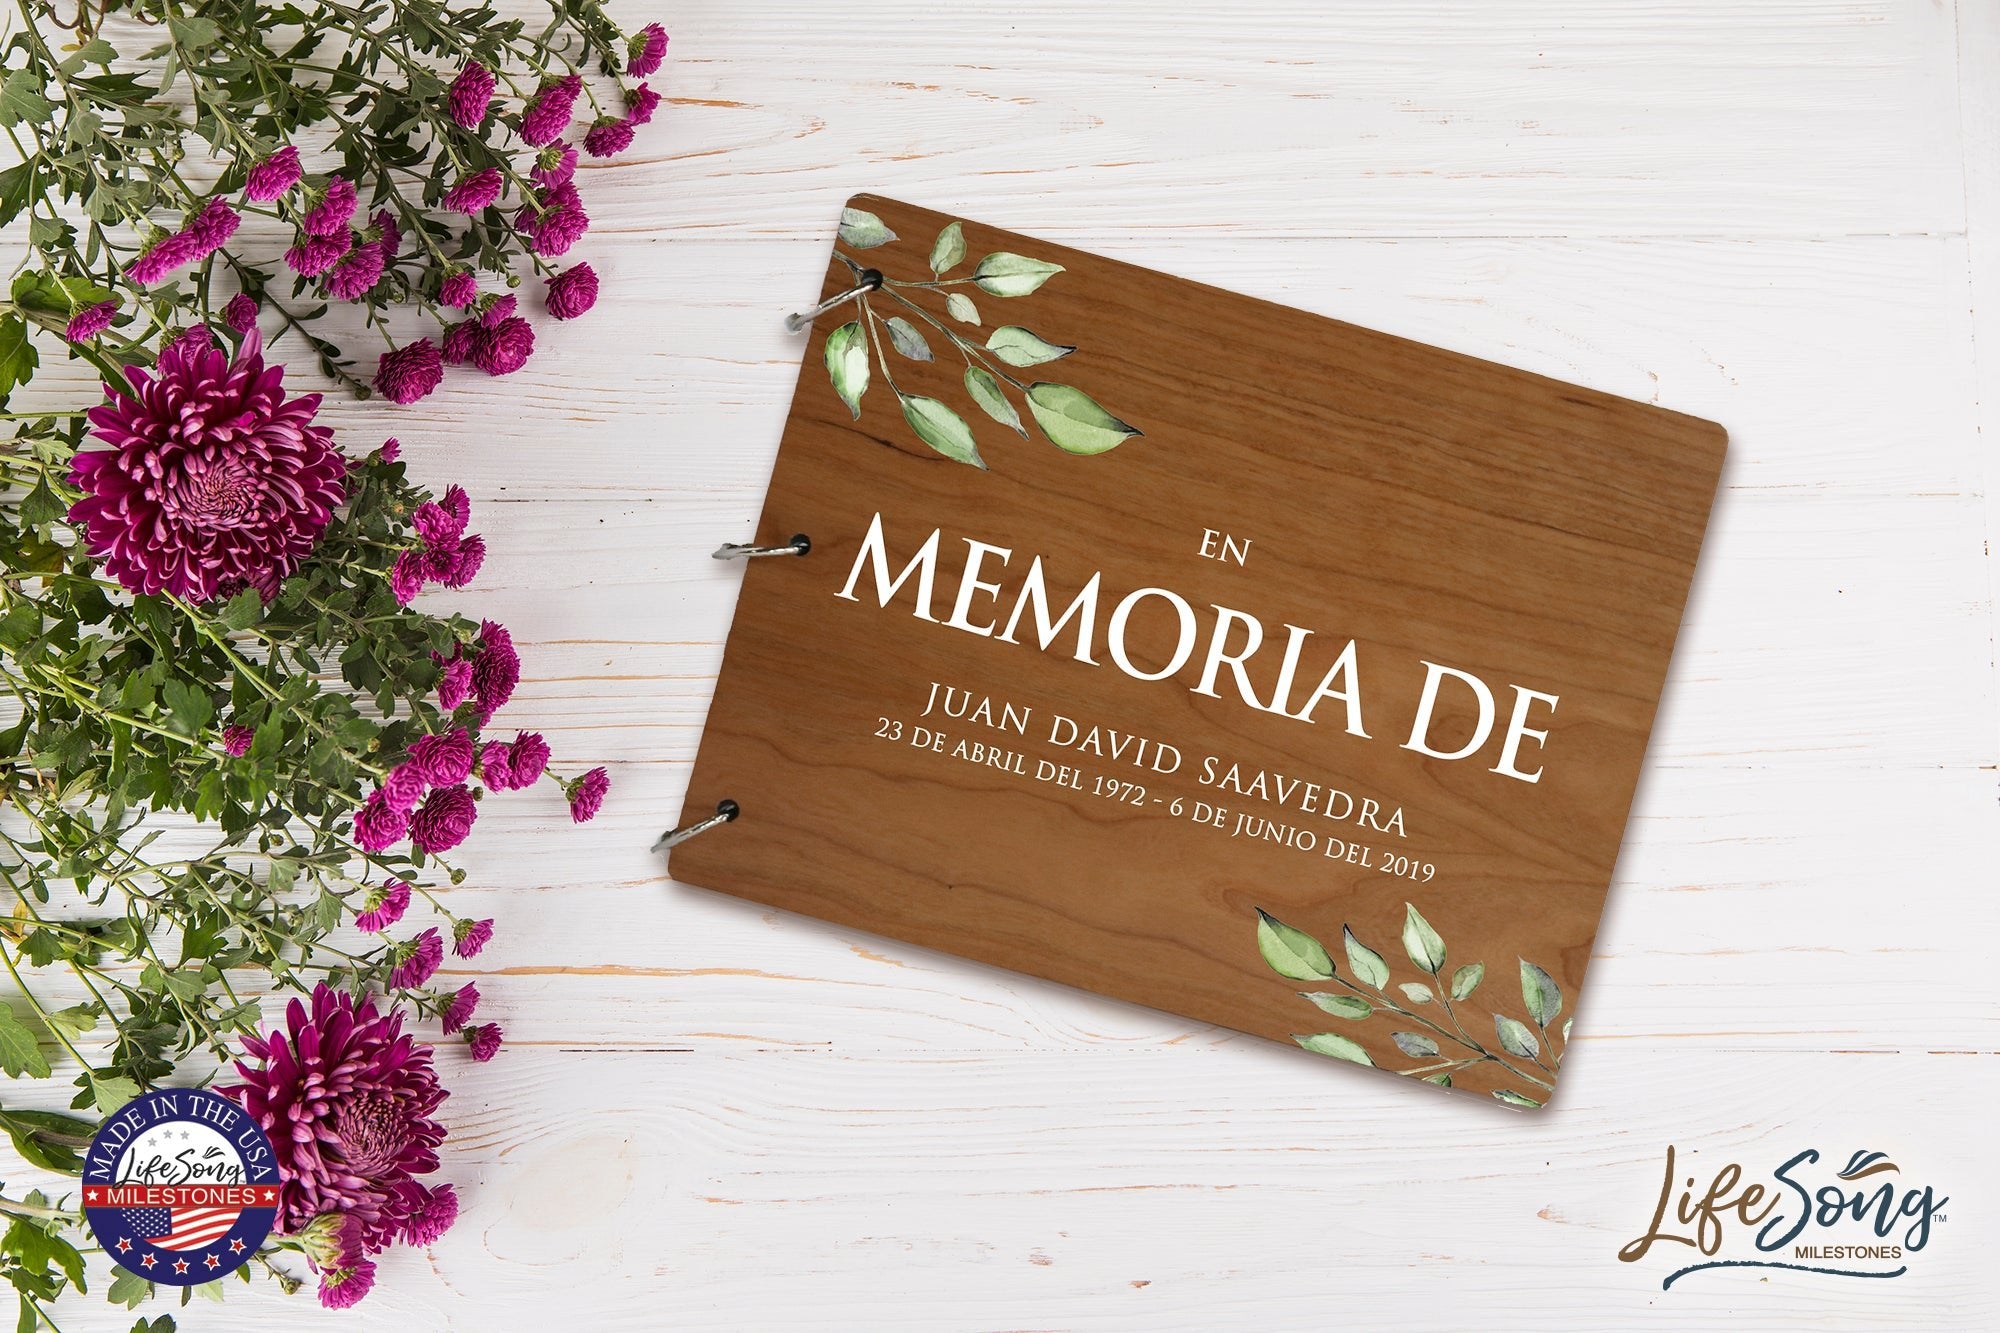 Personalized Wooden Spanish Memorial Guestbook 8.5x11 In Loving Memory - LifeSong Milestones